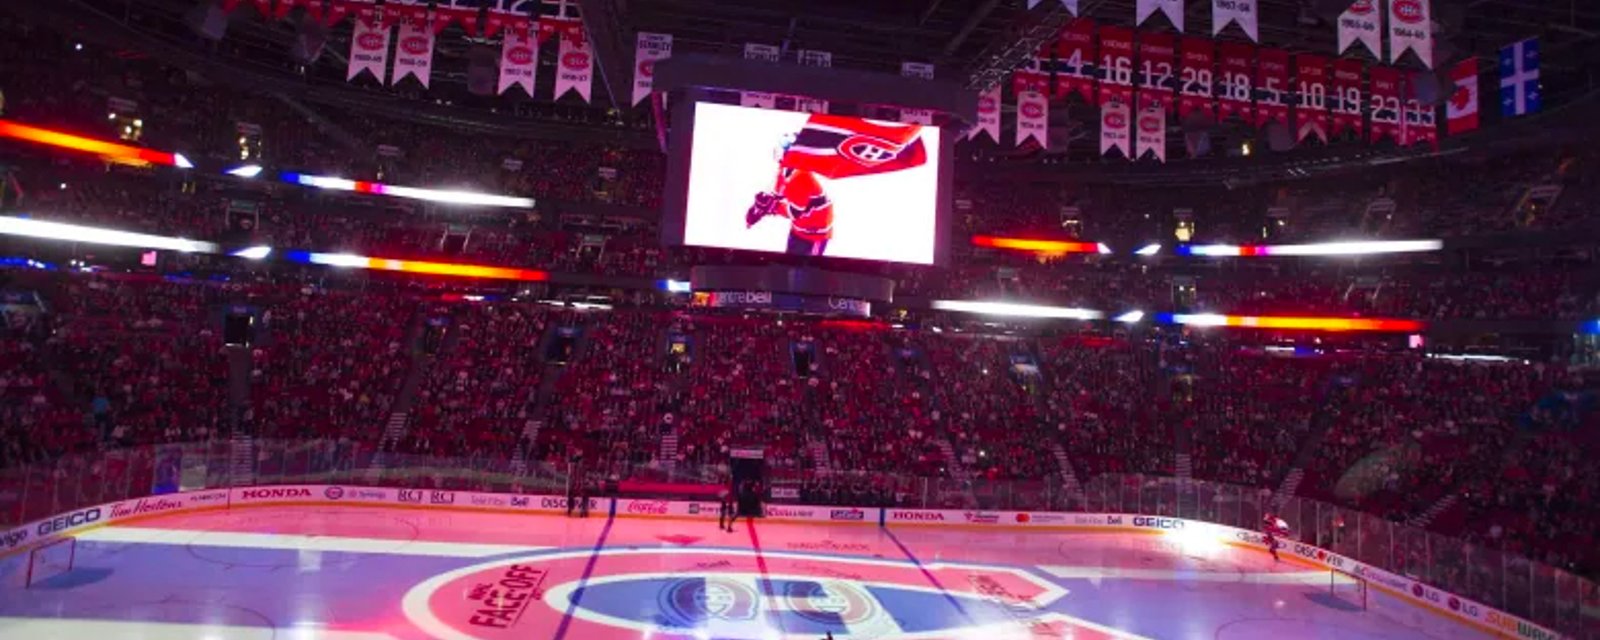 Game 6 in Montreal: fans could pay up to 12 300$ for a single ticket! 